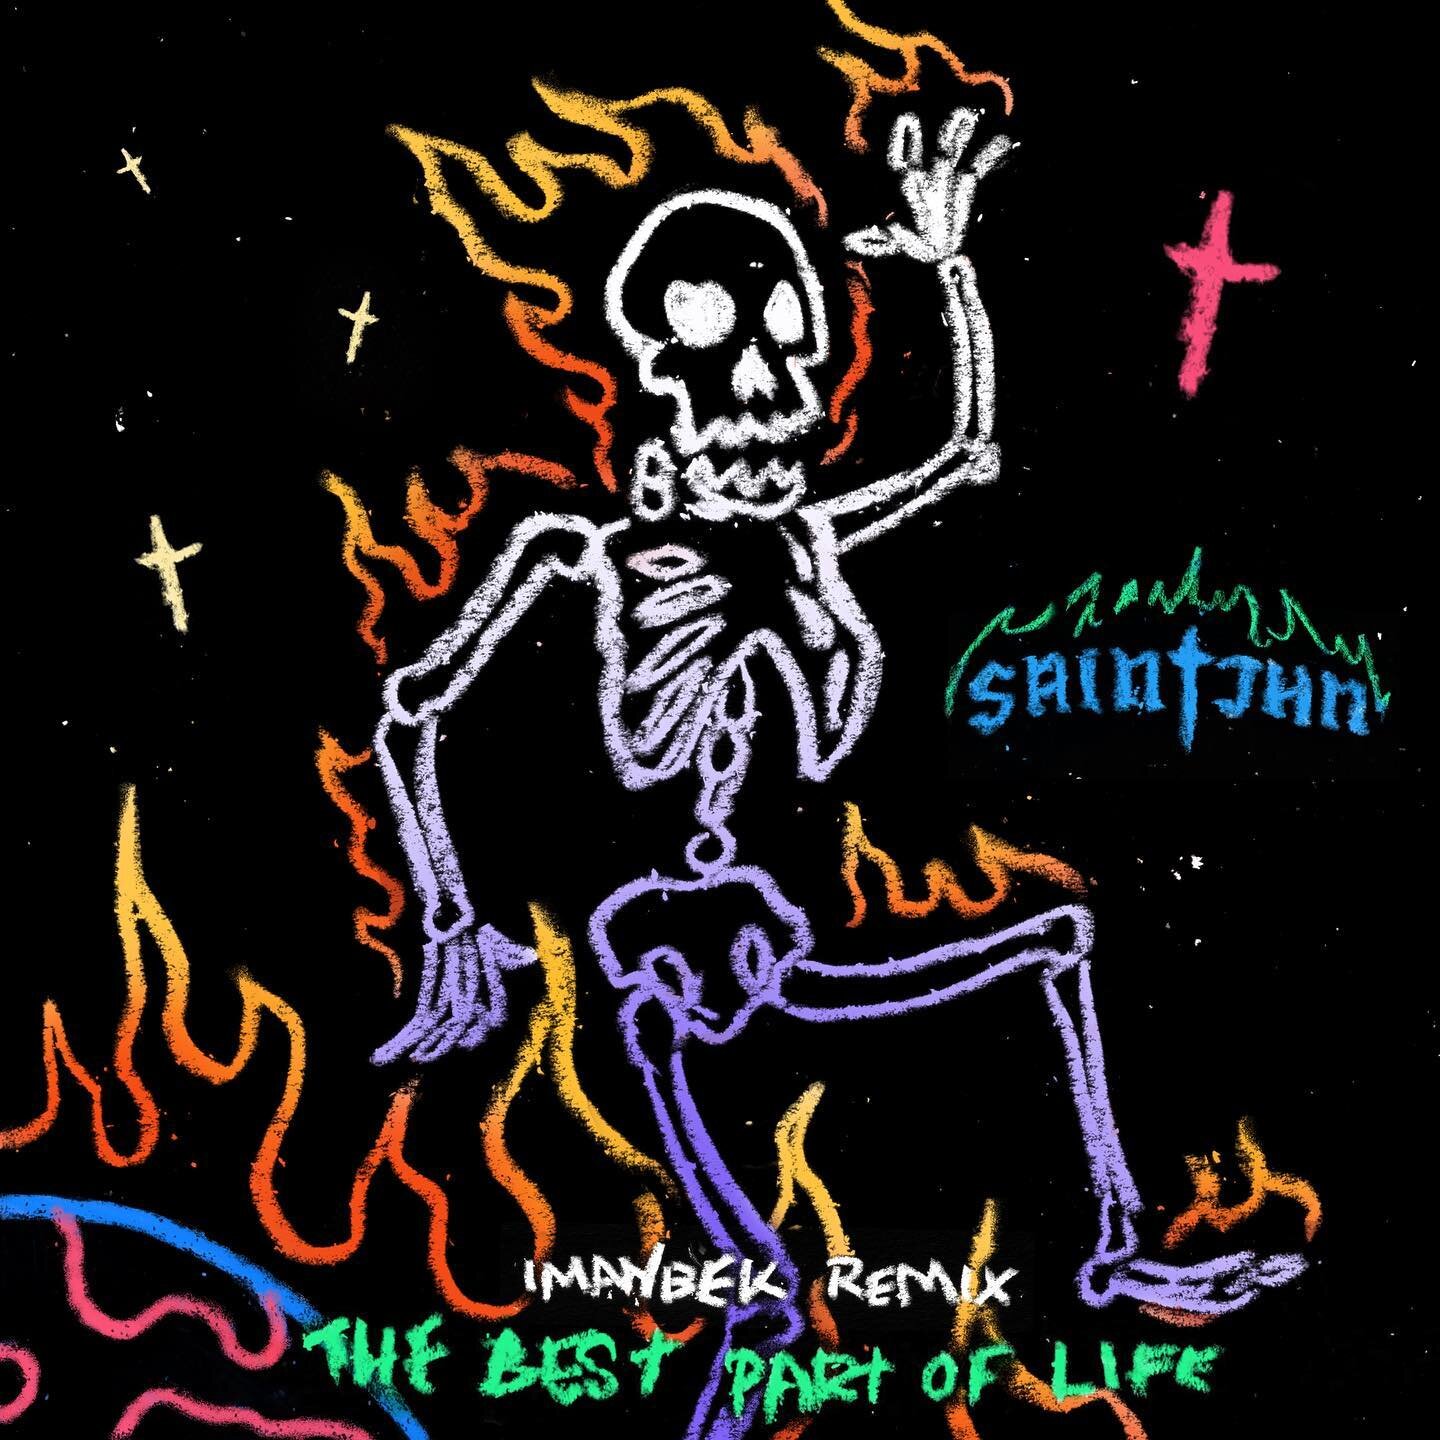 Today @saintjhn launches &ldquo;The Best Part of Life (Imanbek Remix),&rdquo; a brand new fantastic collaboration following the worldwide phenomenon &ldquo;Roses (Imanbek Remix).&rdquo; Link in bio for full press release 🔥🔥🔥